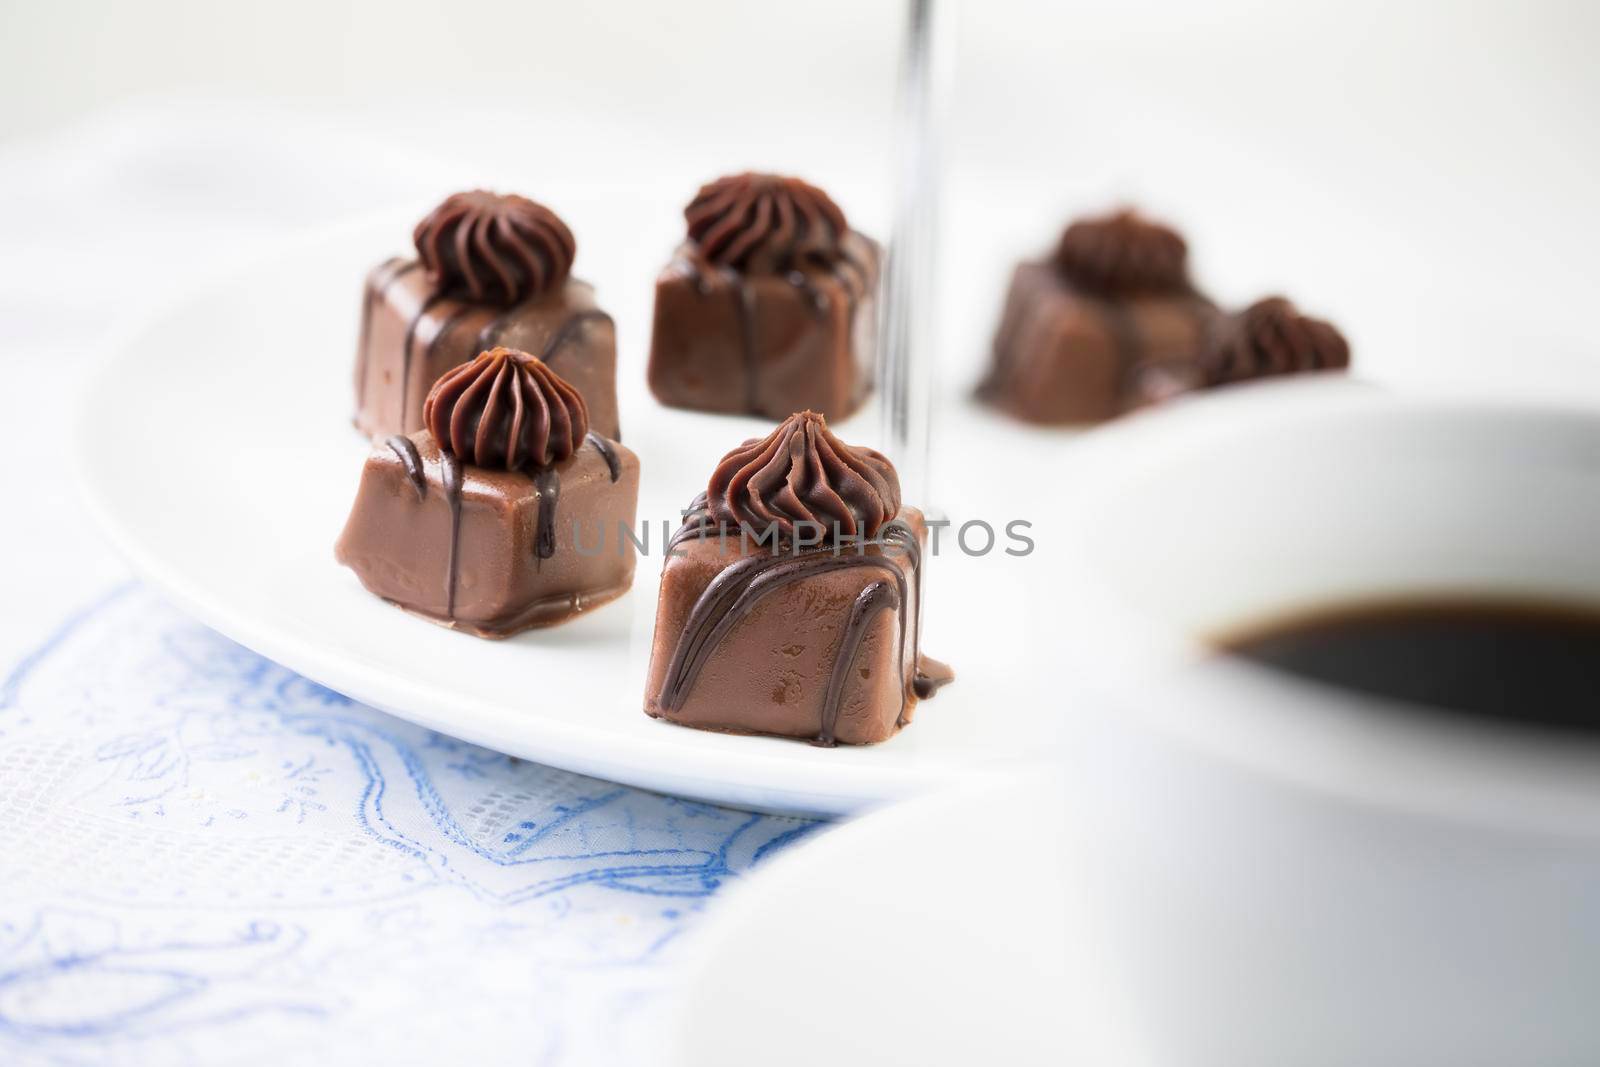 Gourmet chocolates with milk and dark chocolate with coffee out of focus in foreground.